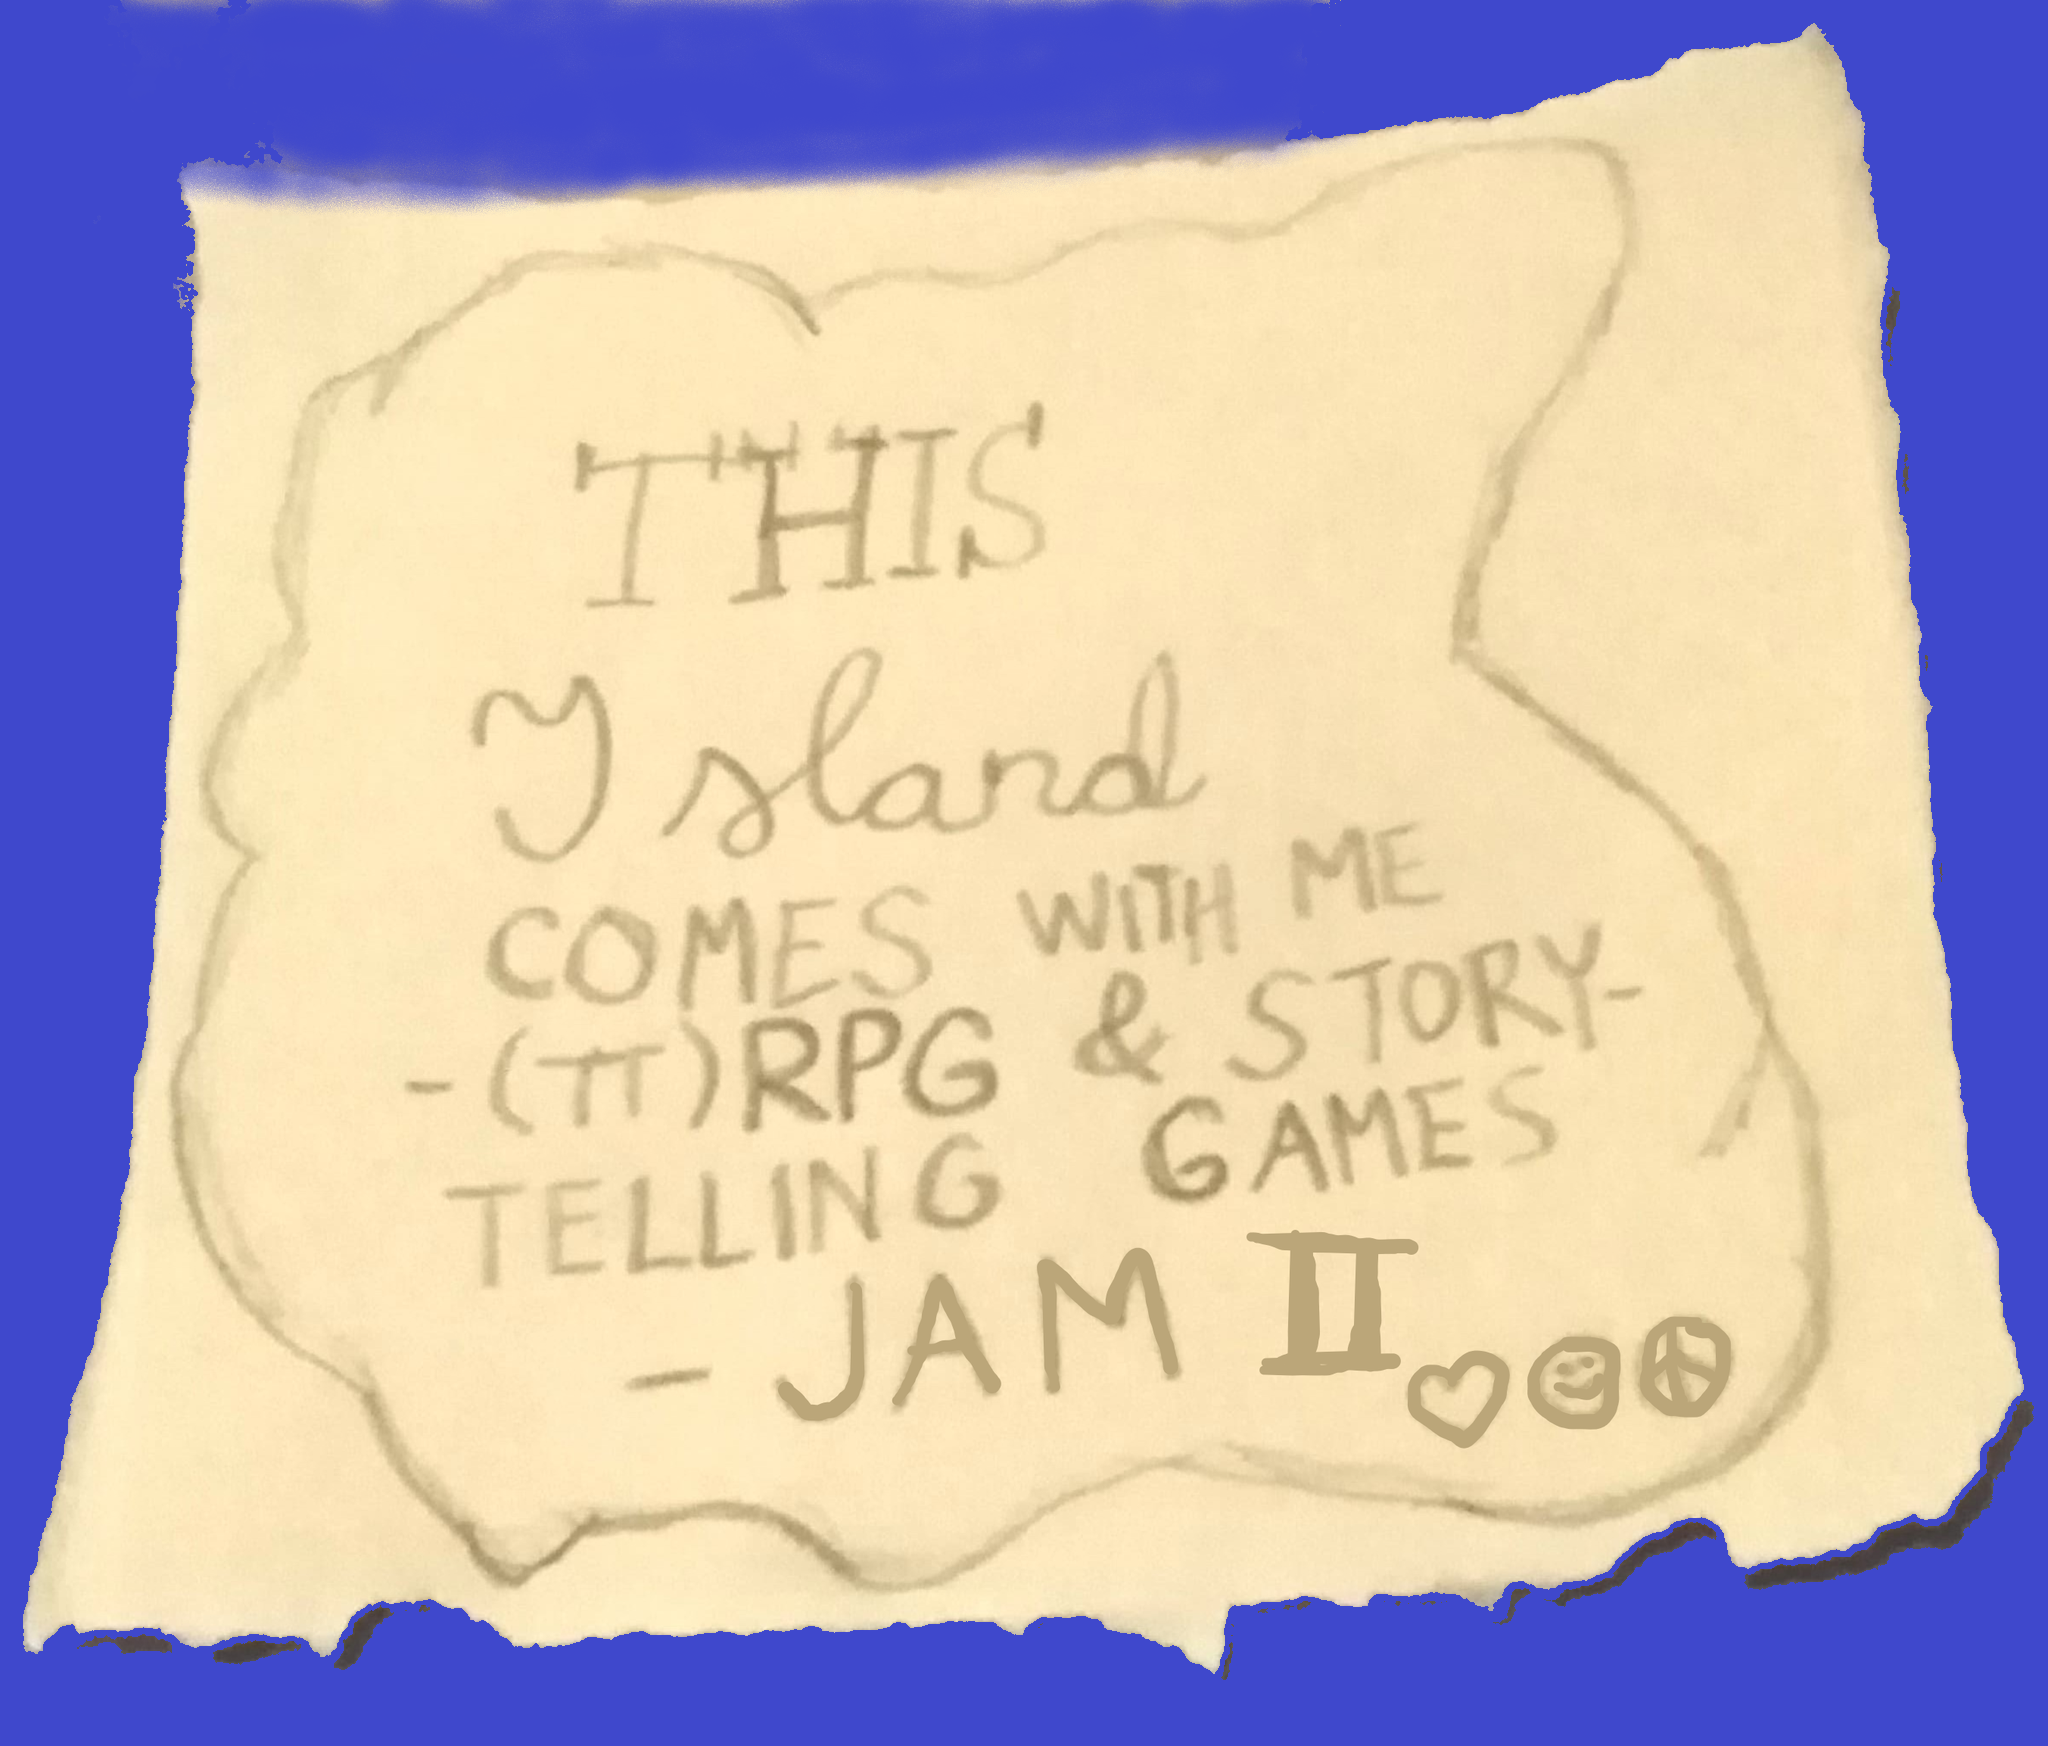 This Island Comes with me JAM II -INFO PACK